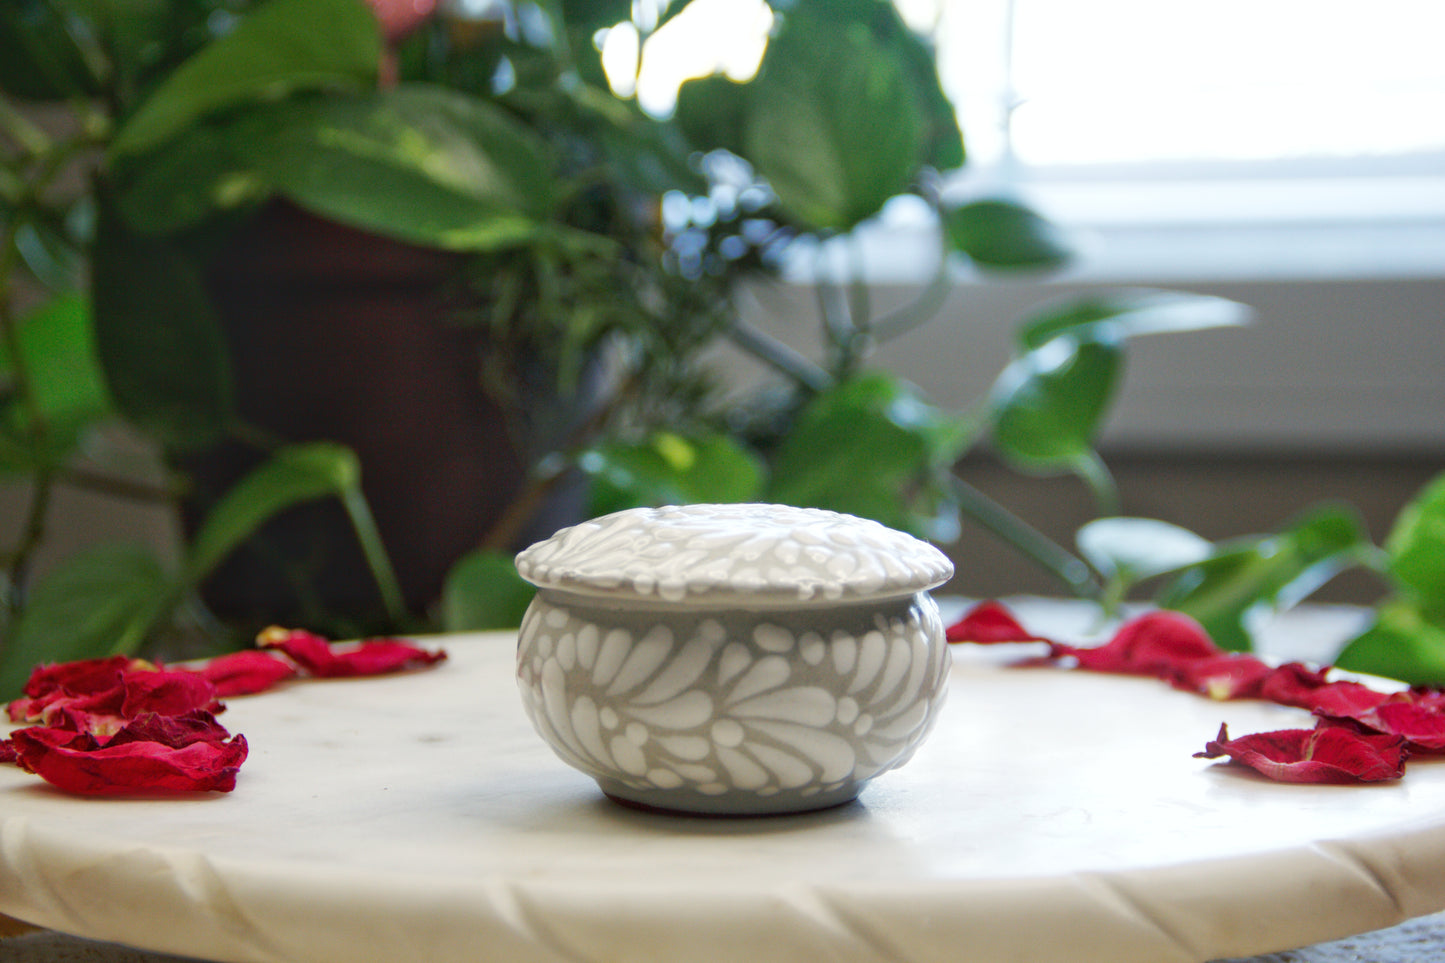 Artisanal candle in a beautiful light grey talavera cup with a closed lid. Handmade white strokes design. Handcrafted by Artisan in Puebla, Mexico. 100% All Natural Soy Candle. Reuse the talavera as home decor or storage.